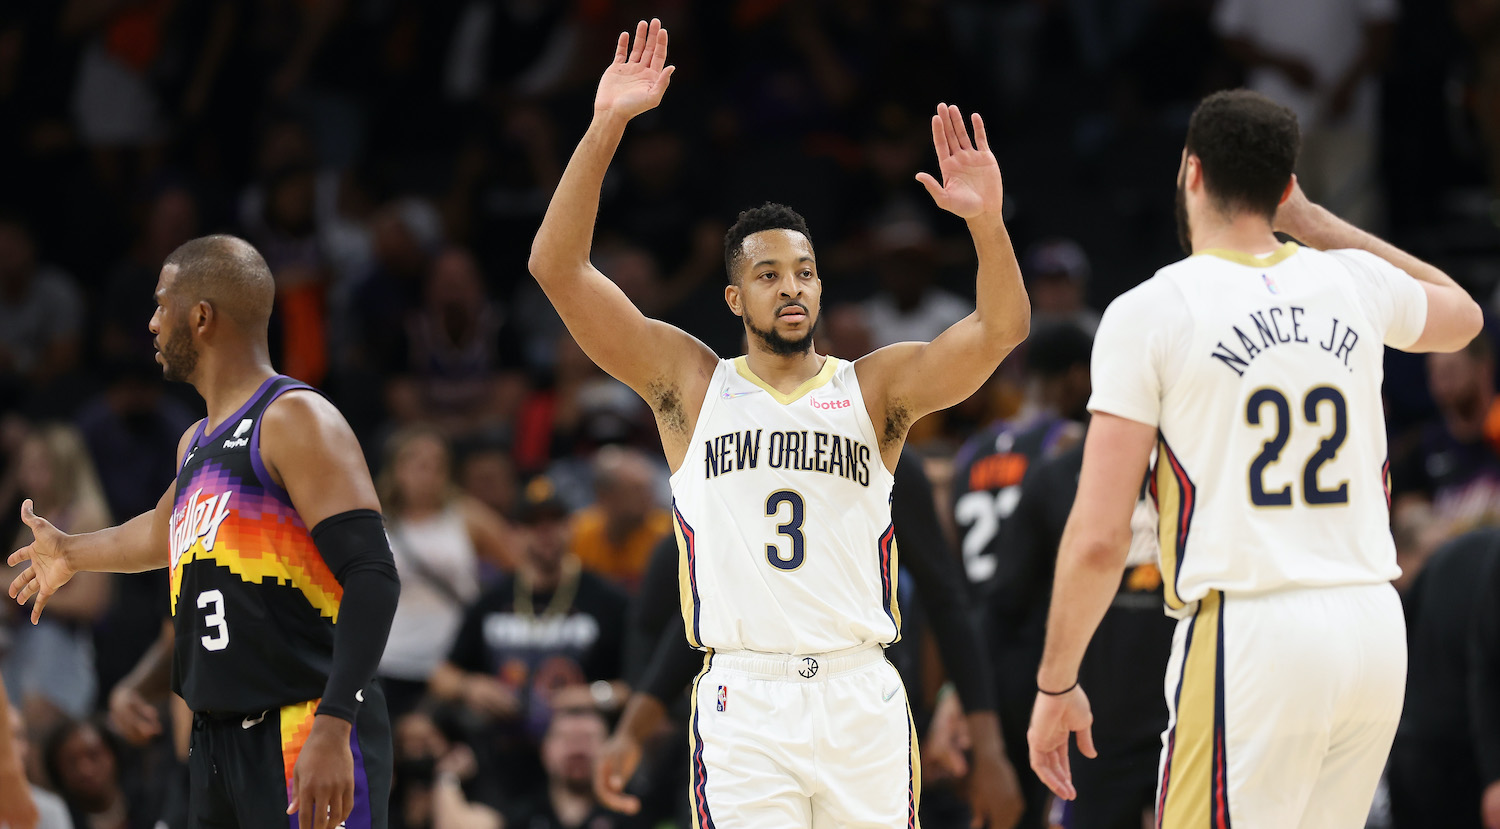 PHOENIX, ARIZONA - APRIL 19: CJ McCollum #3 of the New Orleans Pelicans celebrates with Larry Nance Jr. #22 following Game Two of the Western Conference First Round NBA Playoffs at Footprint Center on April 19, 2022 in Phoenix, Arizona. The Pelicans defeated the Suns 125-114. NOTE TO USER: User expressly acknowledges and agrees that, by downloading and or using this photograph, User is consenting to the terms and conditions of the Getty Images License Agreement. (Photo by Christian Petersen/Getty Images)